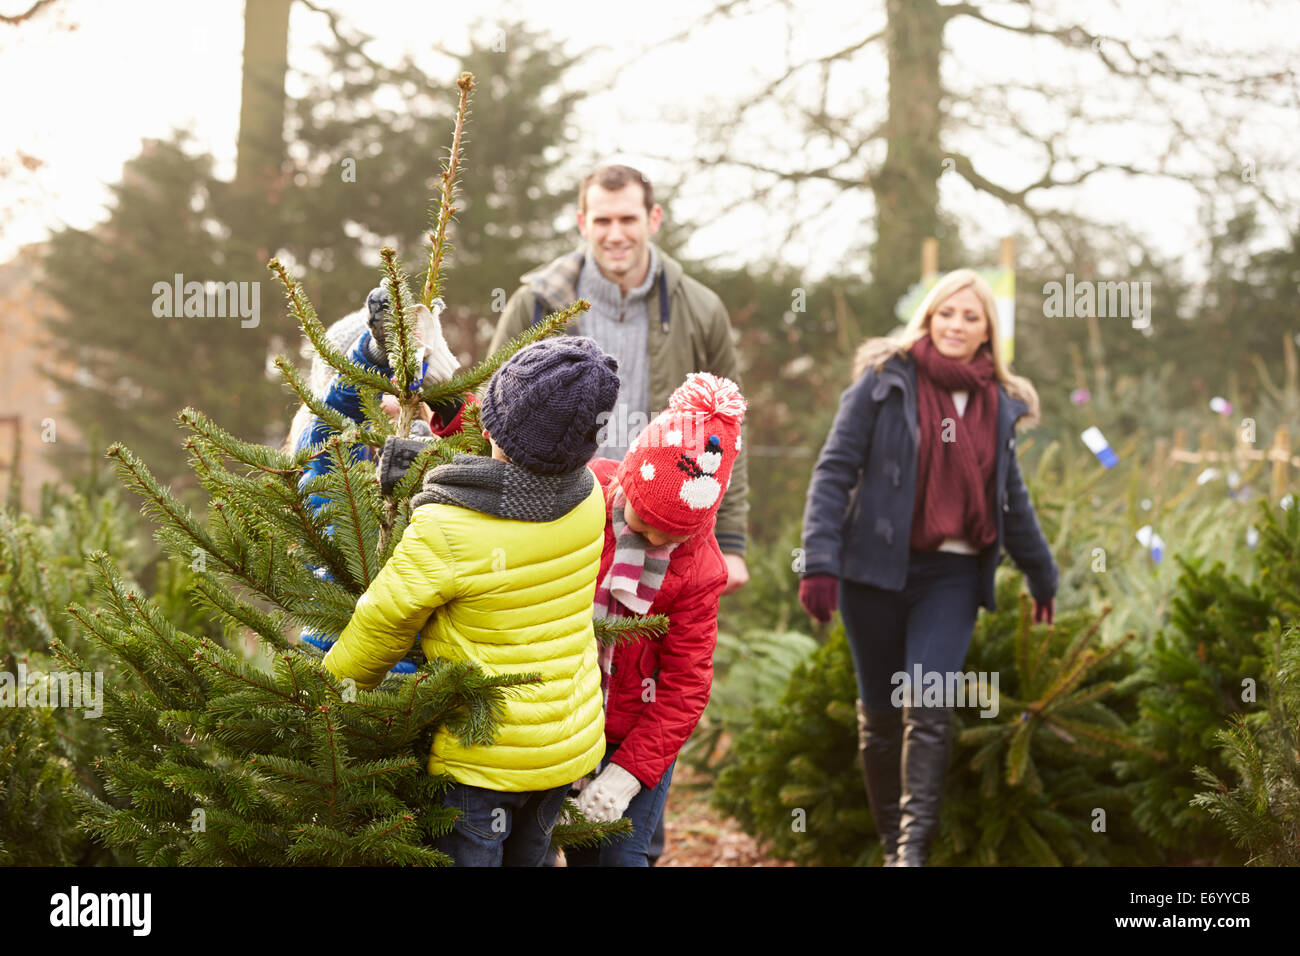 Outdoor Family Choosing Christmas Tree Together Stock Photo